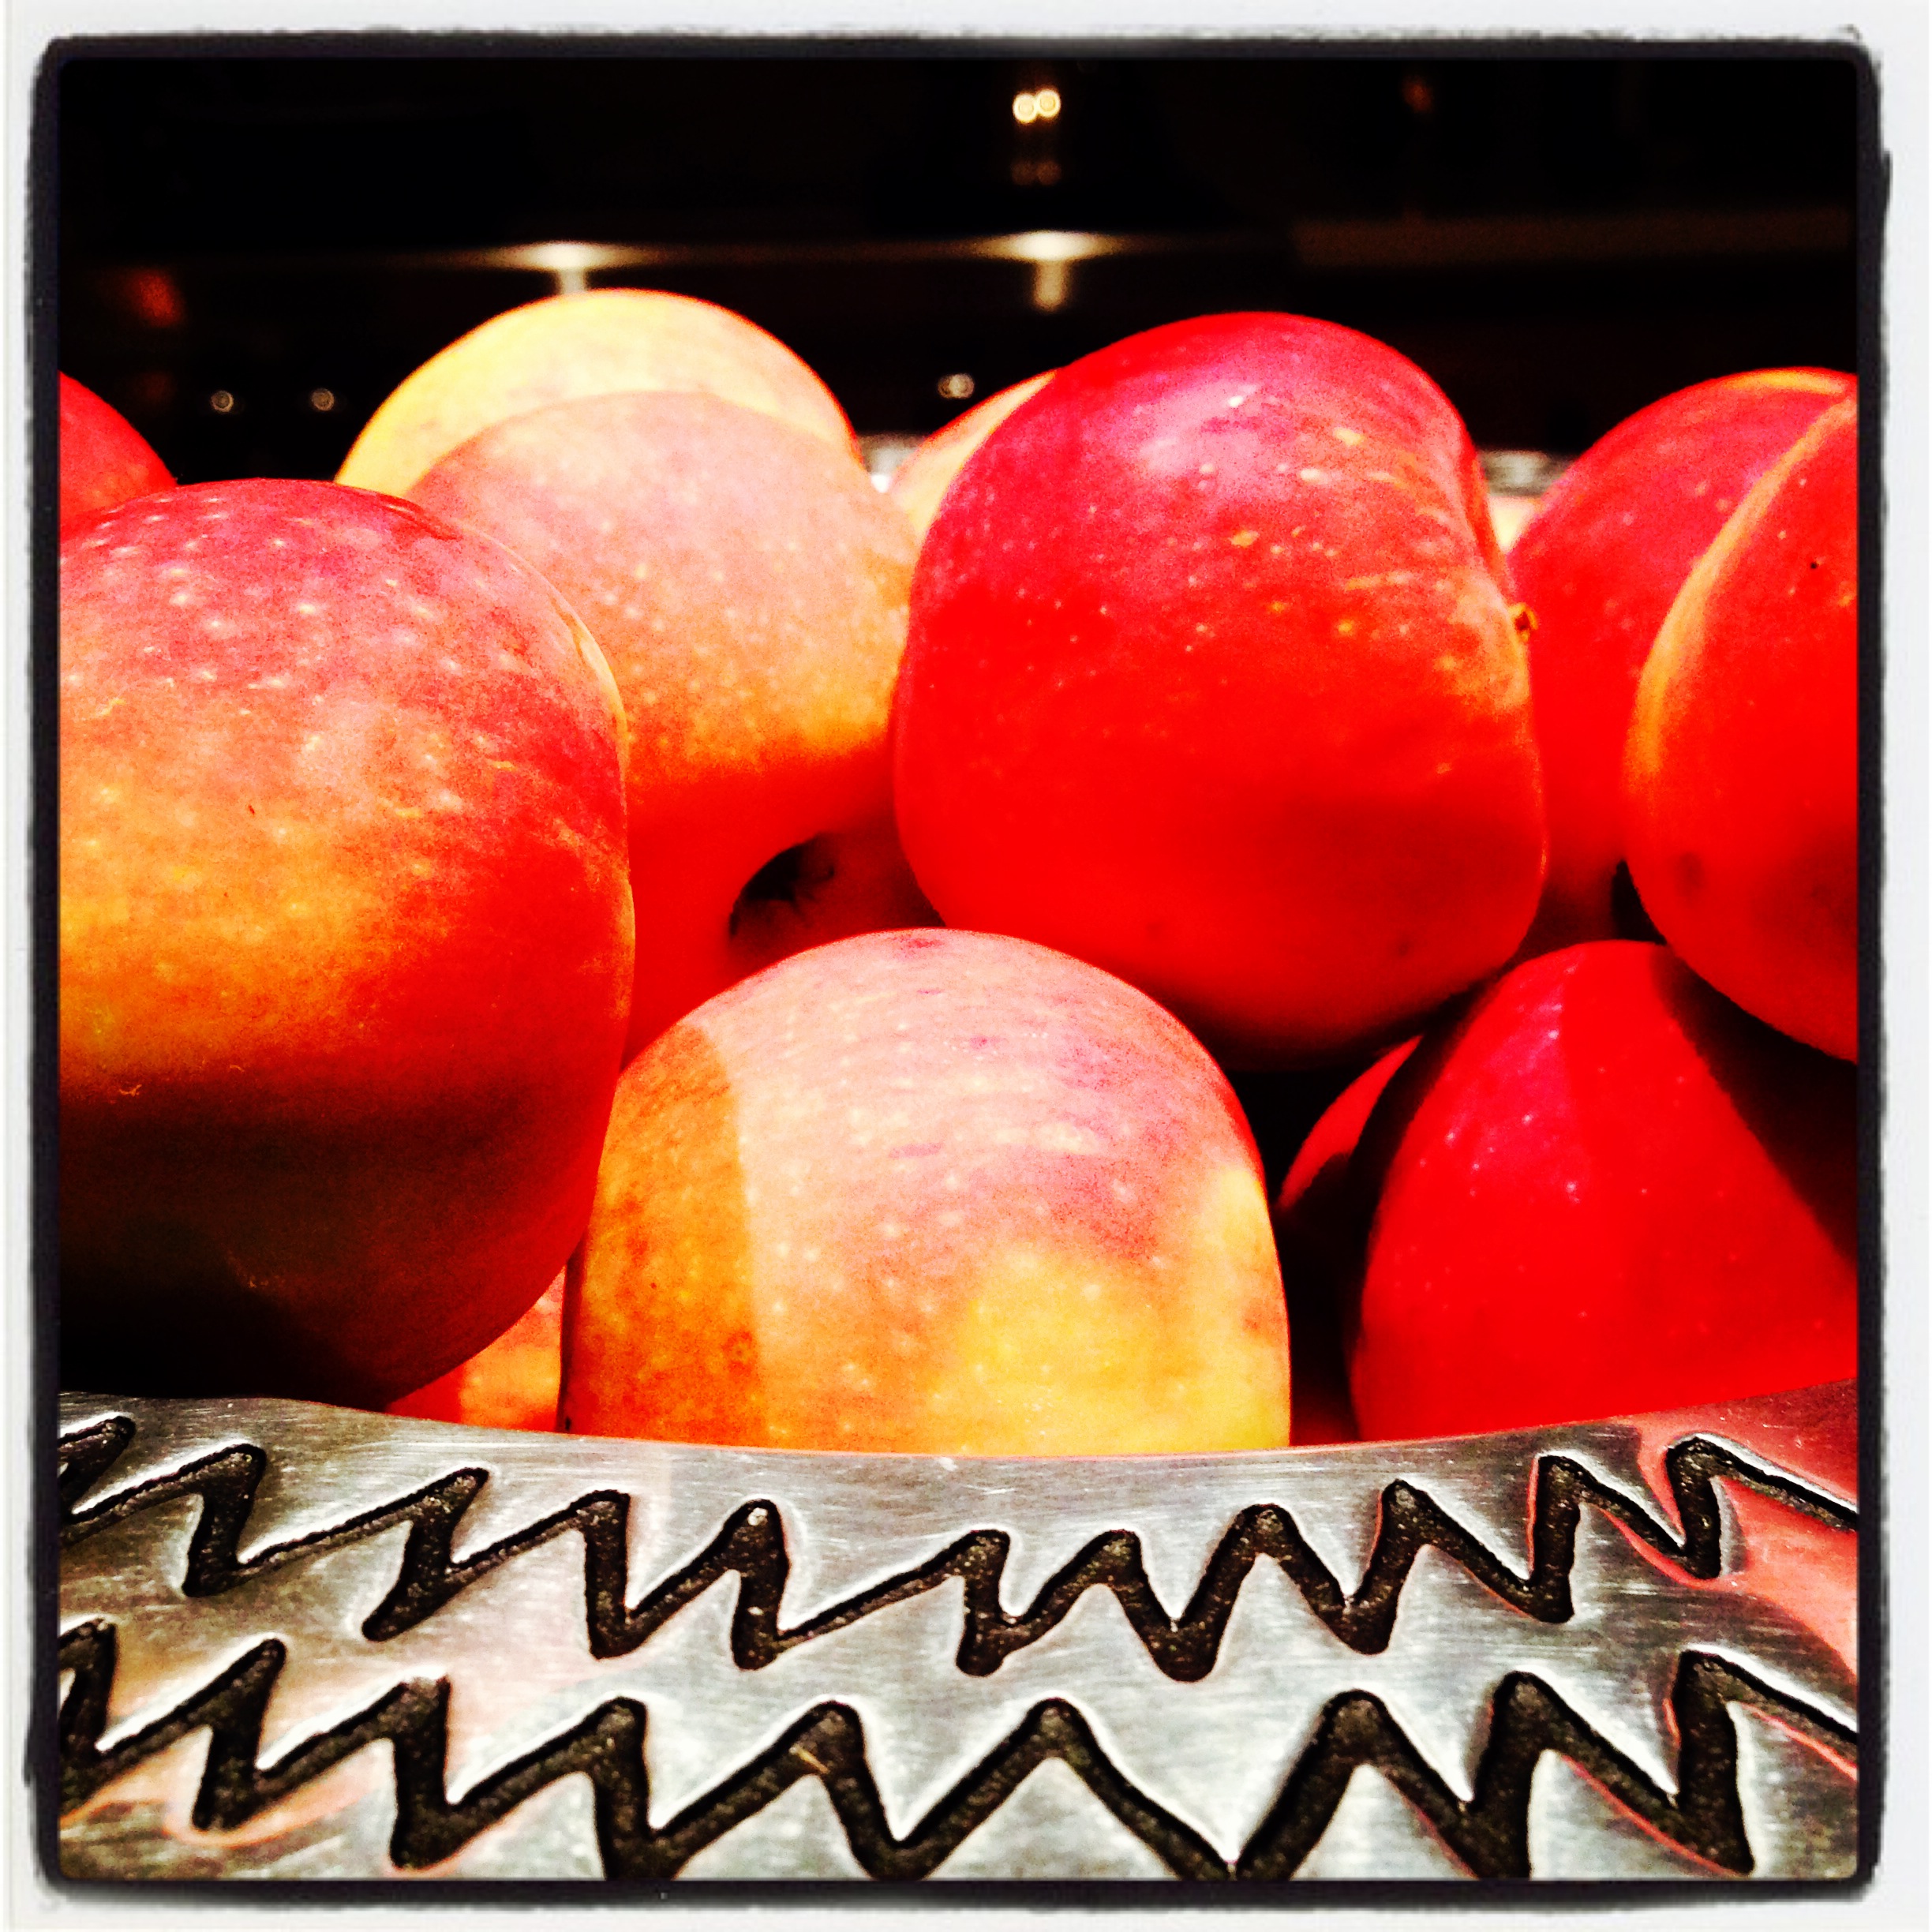 This one fell flat on Instagram, maybe because I cropped it so closely and the color of those apples is so saturated.